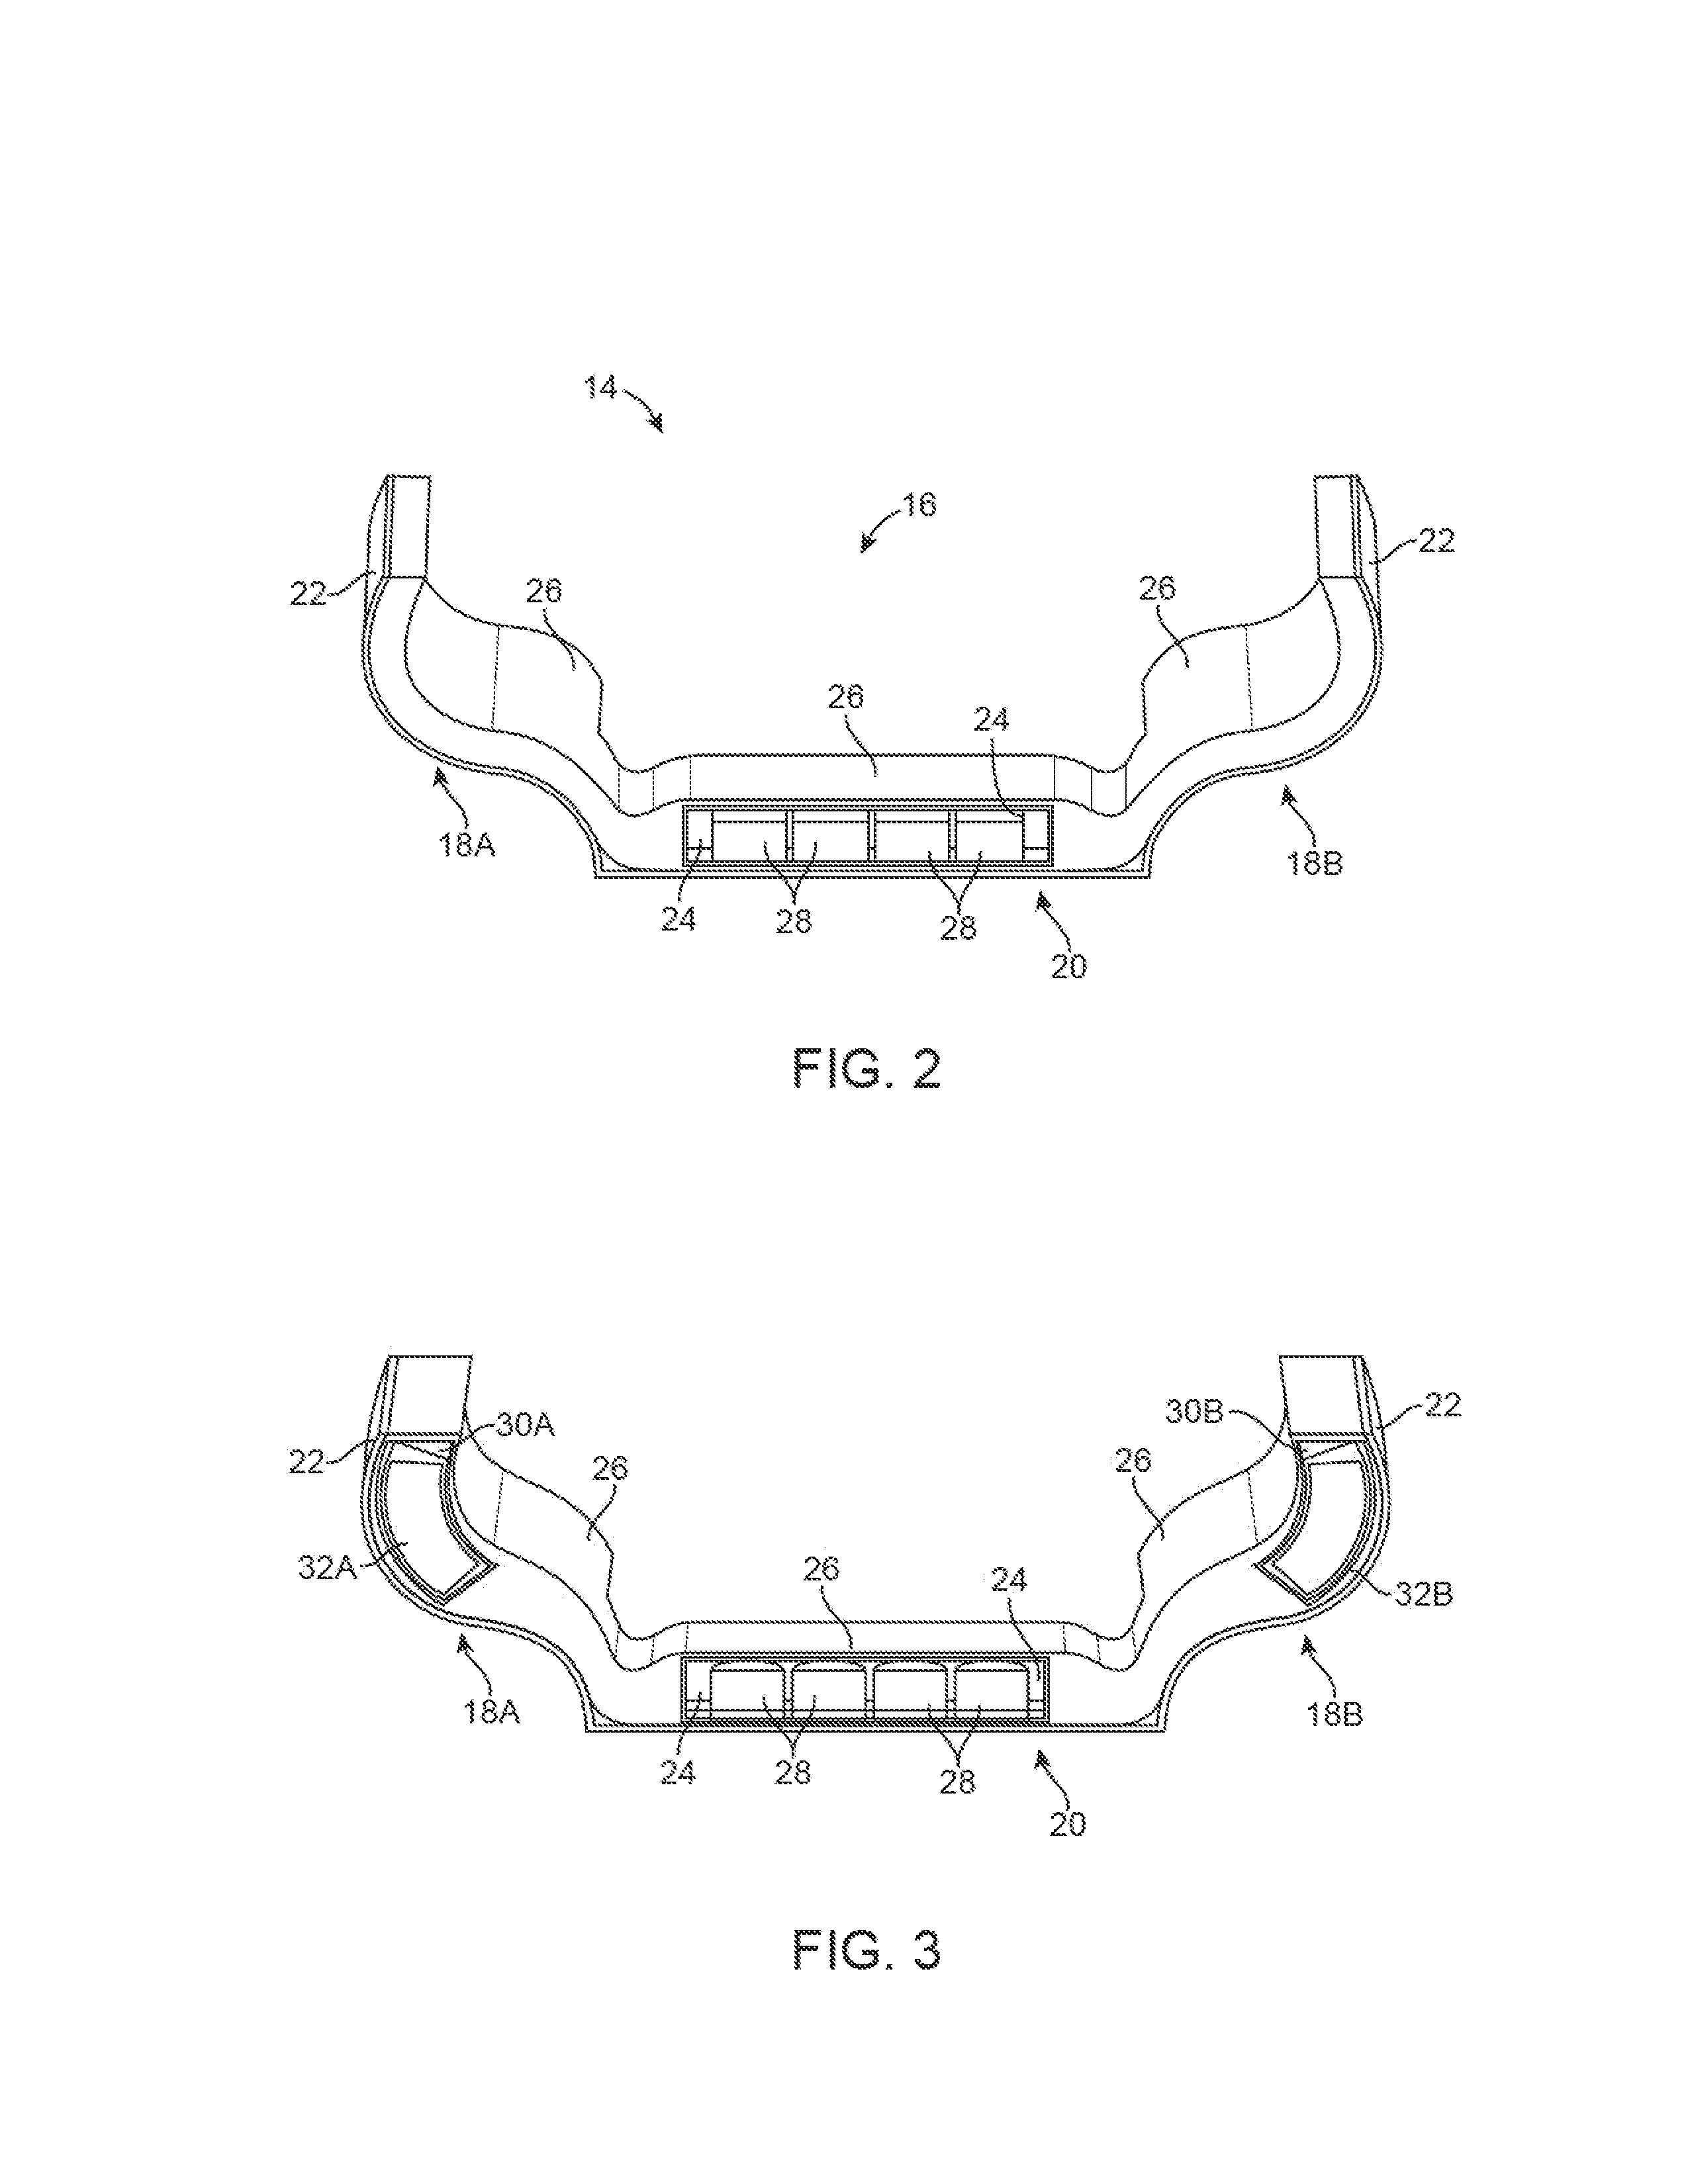 Method and devices for prevention and treatment of pressure ulcers